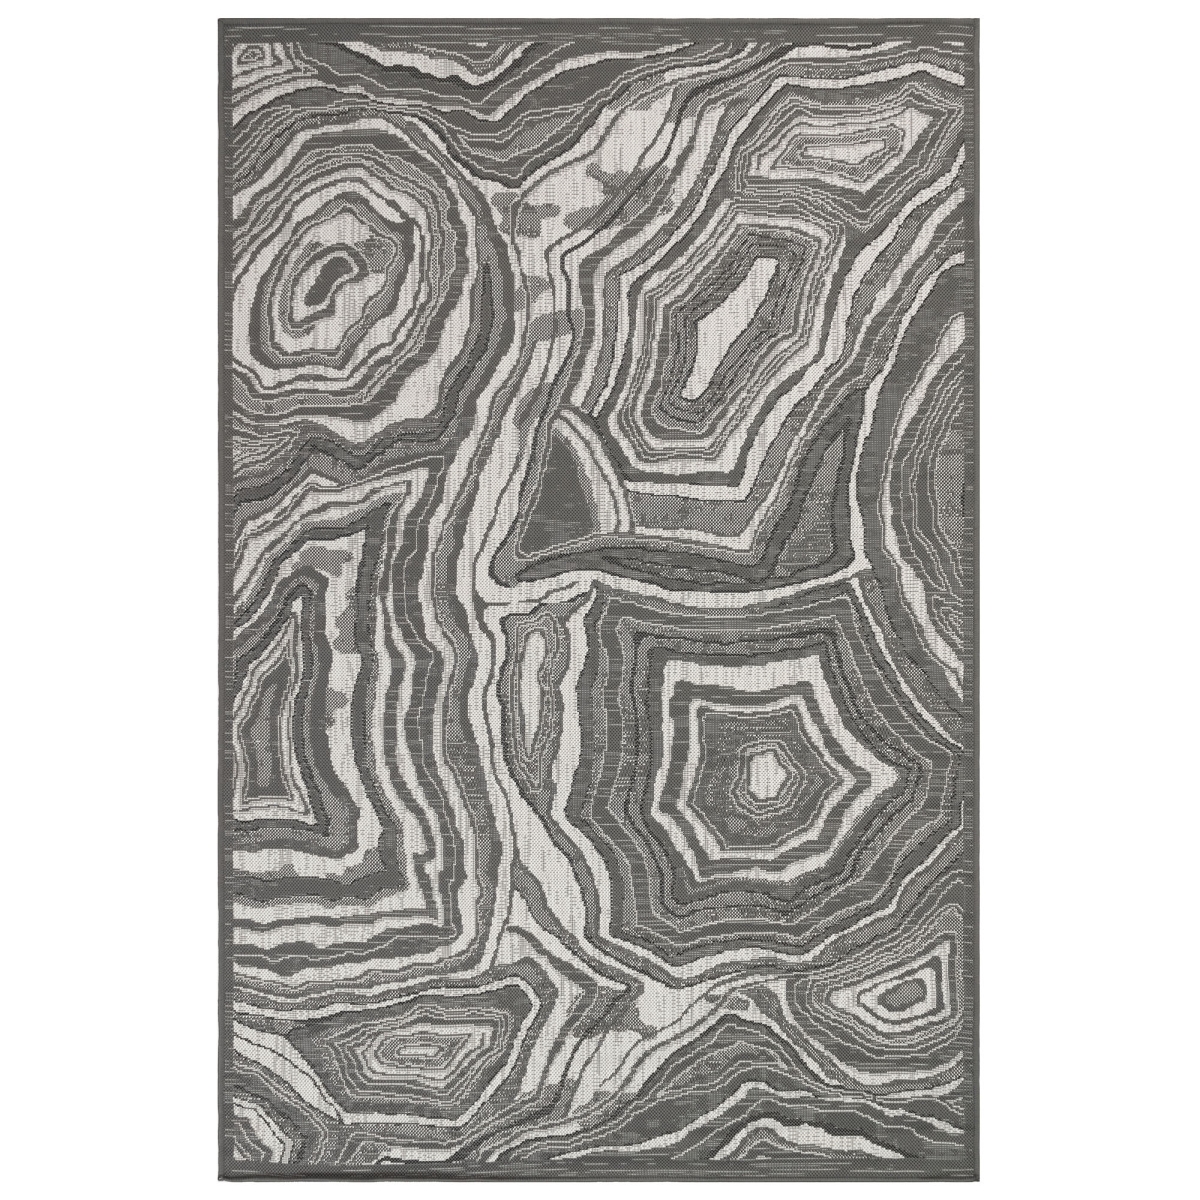 Cre69841097 Liora Manne Carmel Agate Indoor & Outdoor Rug, Grey - 6 Ft. 6 In. X 9 Ft. 4 In.